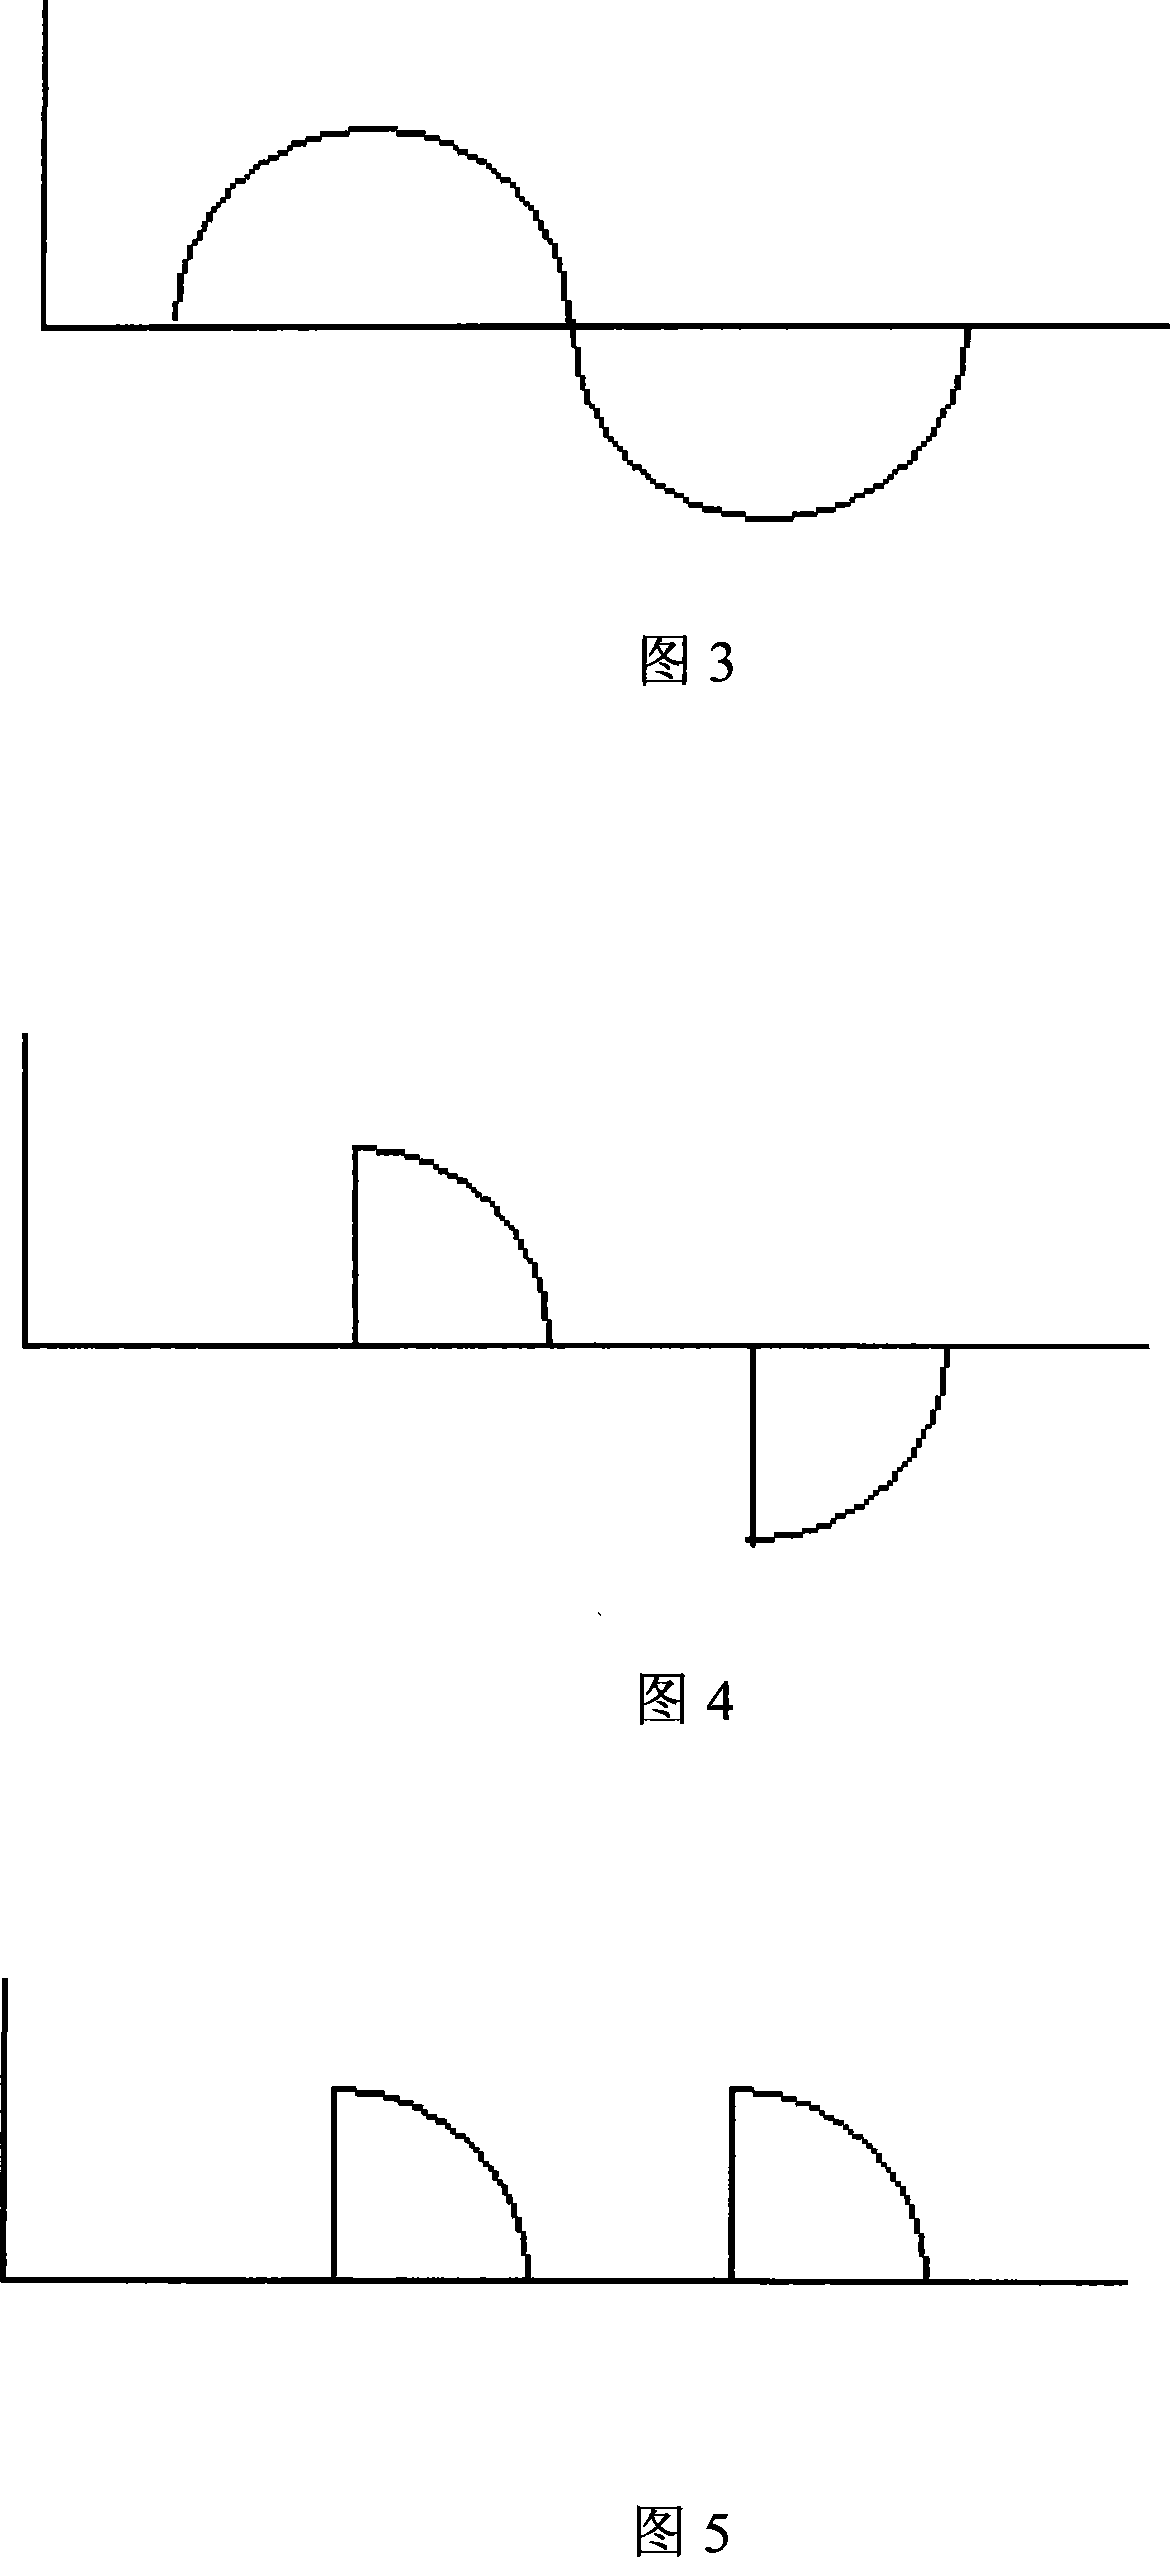 Supply apparatus for light modulation of LED